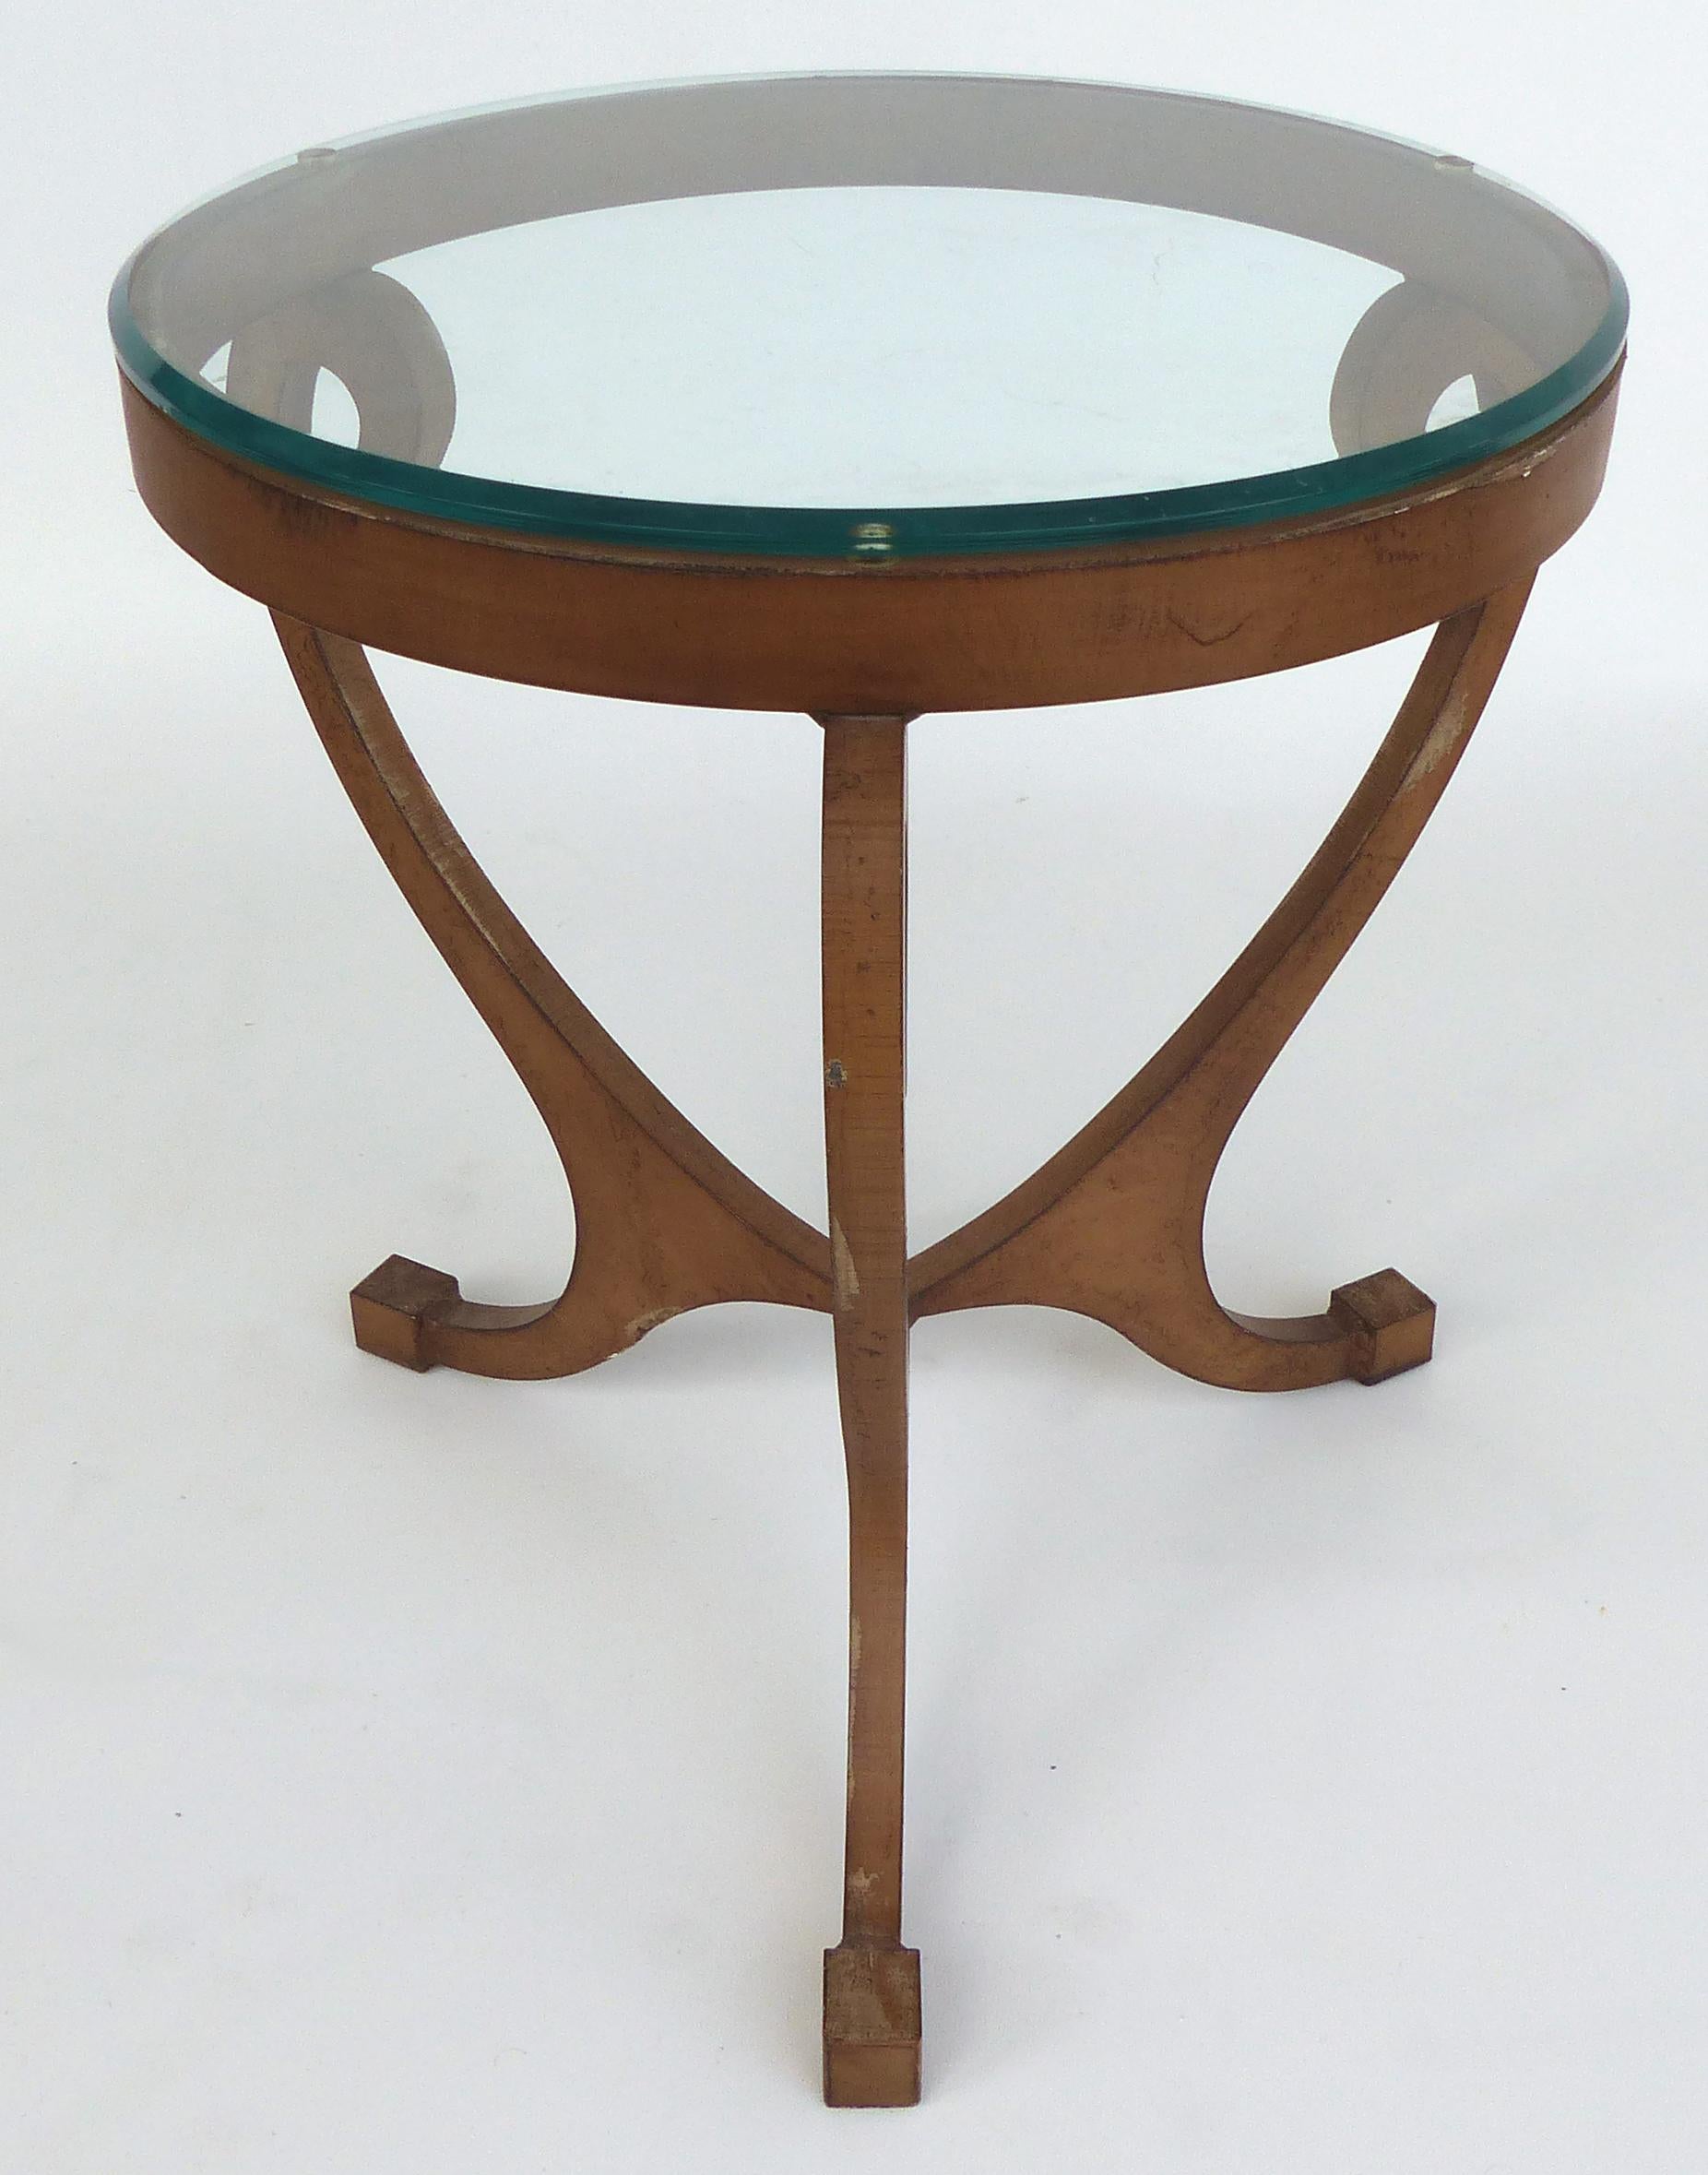 Wrought Iron Side Table with Glass Top

Offered for sale is a substantial three-leg wrought iron side table with handcut curved legs and support details. The table is cut from extremely heavy stock and fitted with a glass top that has a blunt edge.